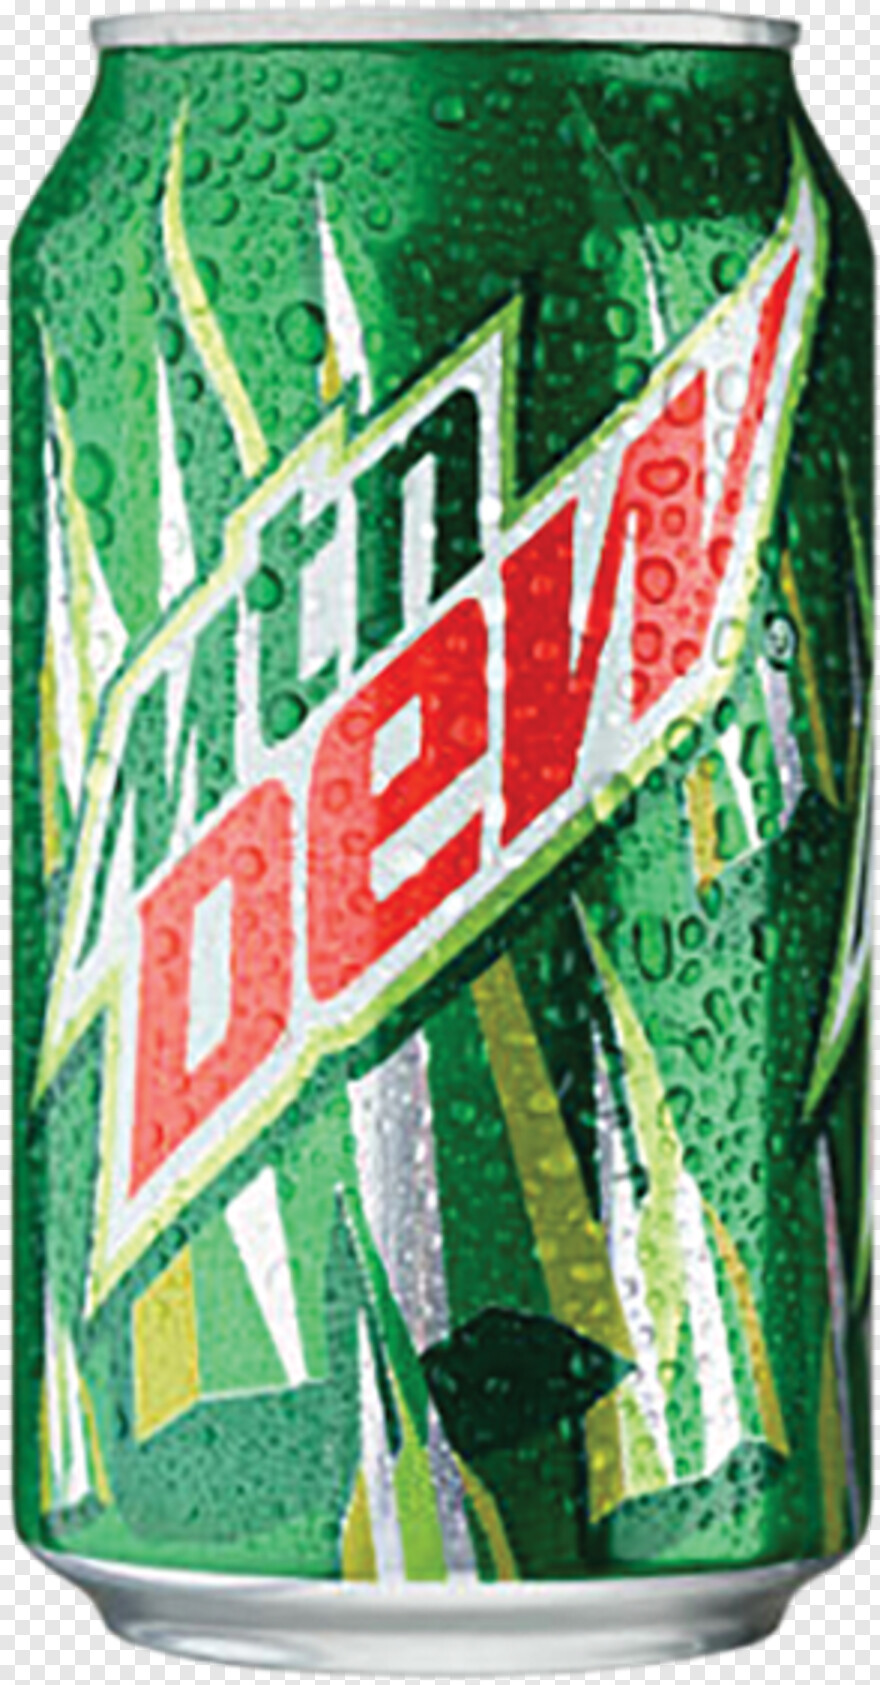 mountain-dew-can # 314912